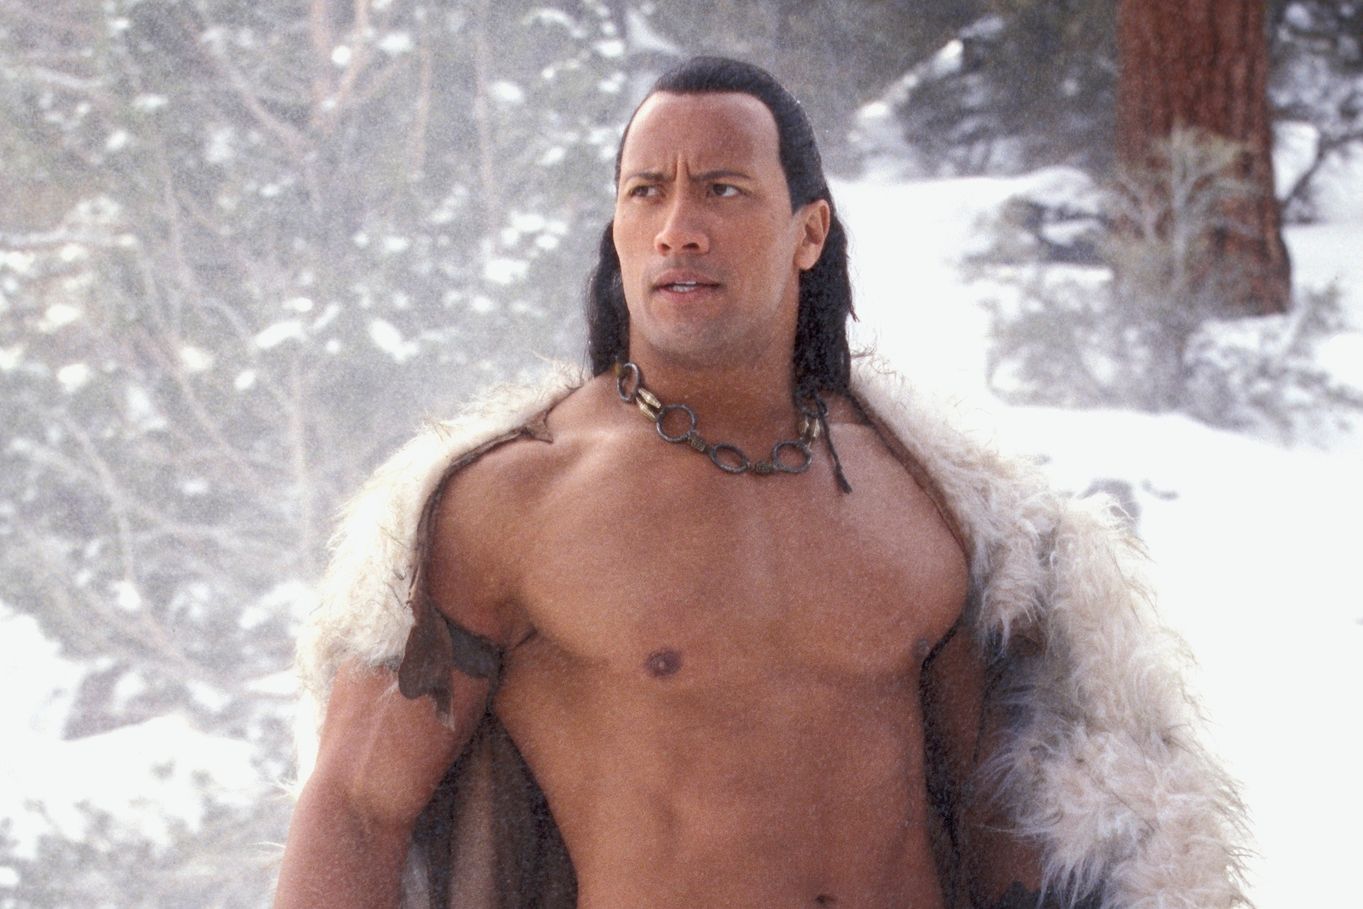 Dwayne Johnson, the protagonist of the first The Scorpion King, will only be producing the reboot.